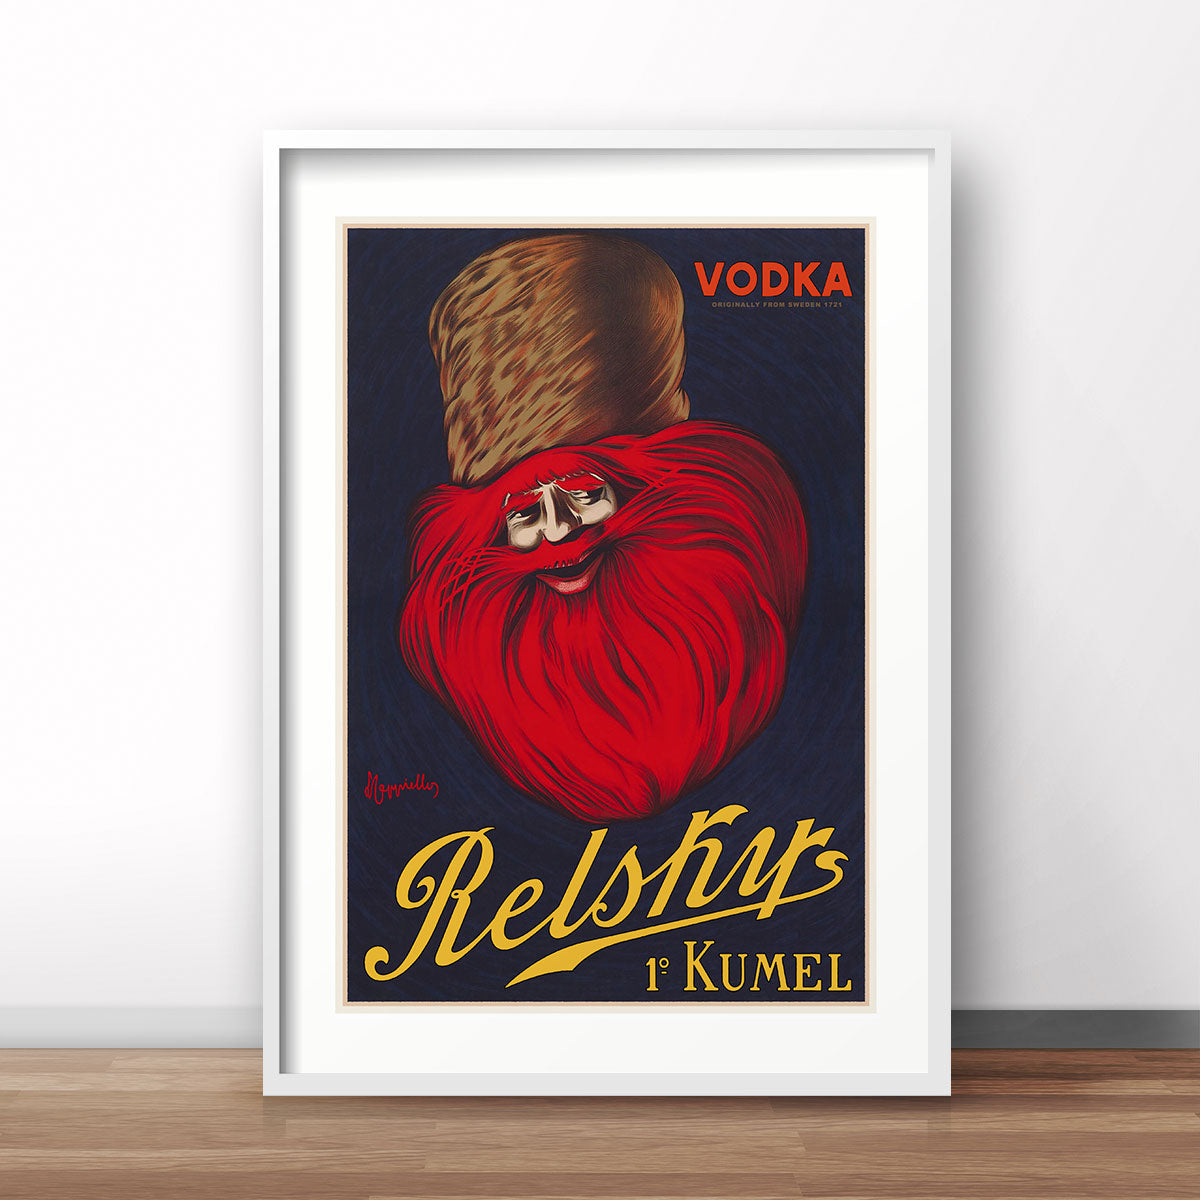 Relskys Vodka retro vintage poster print from Places We Luv